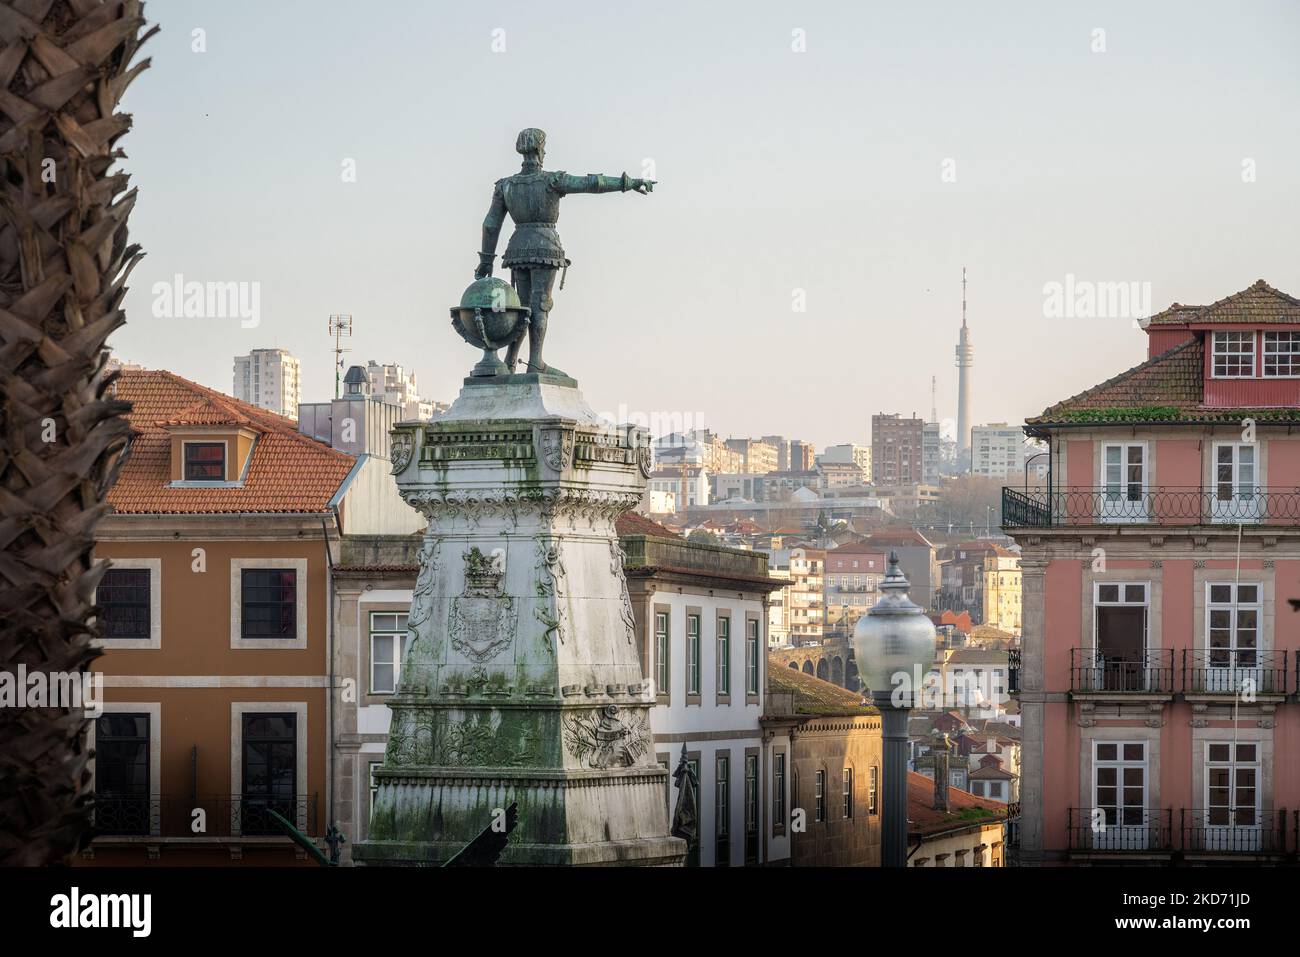 Monument to Prince Henry the Navigator at Infante D. Henrique Square - Porto, Portugal Stock Photo